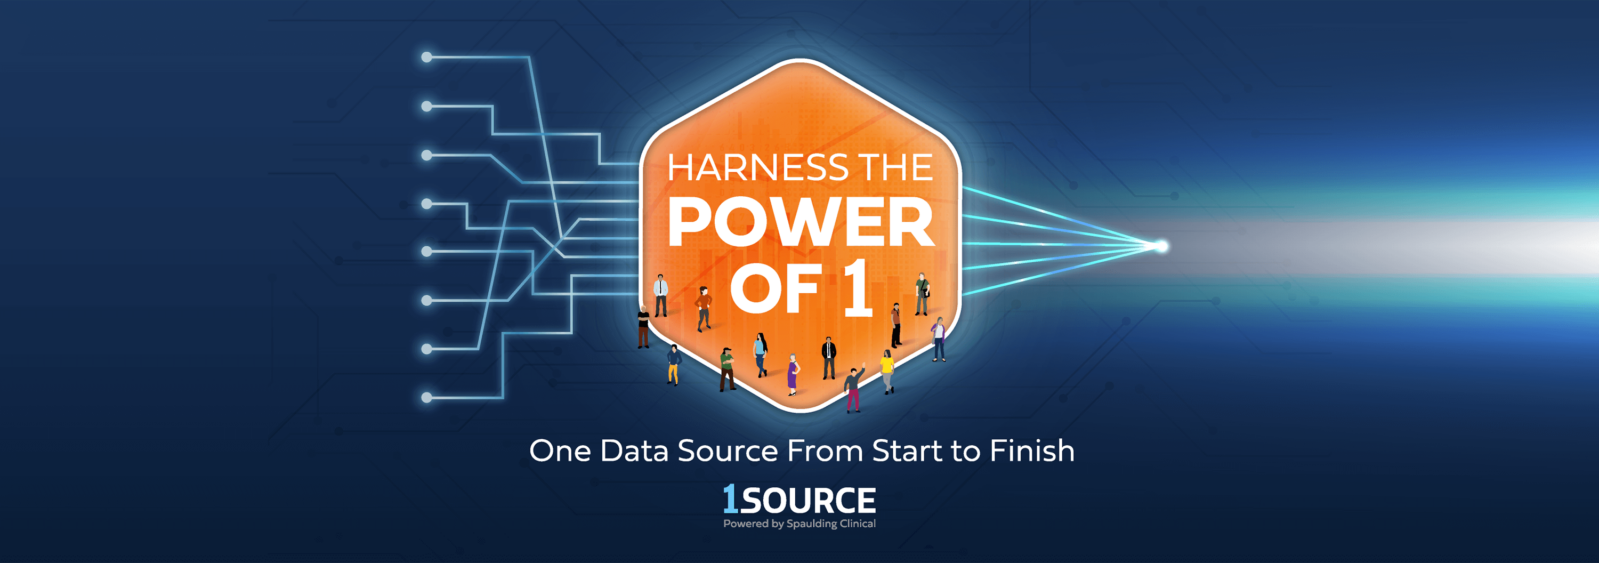 Harness the power of 1. One data source from start to finish. 1Source